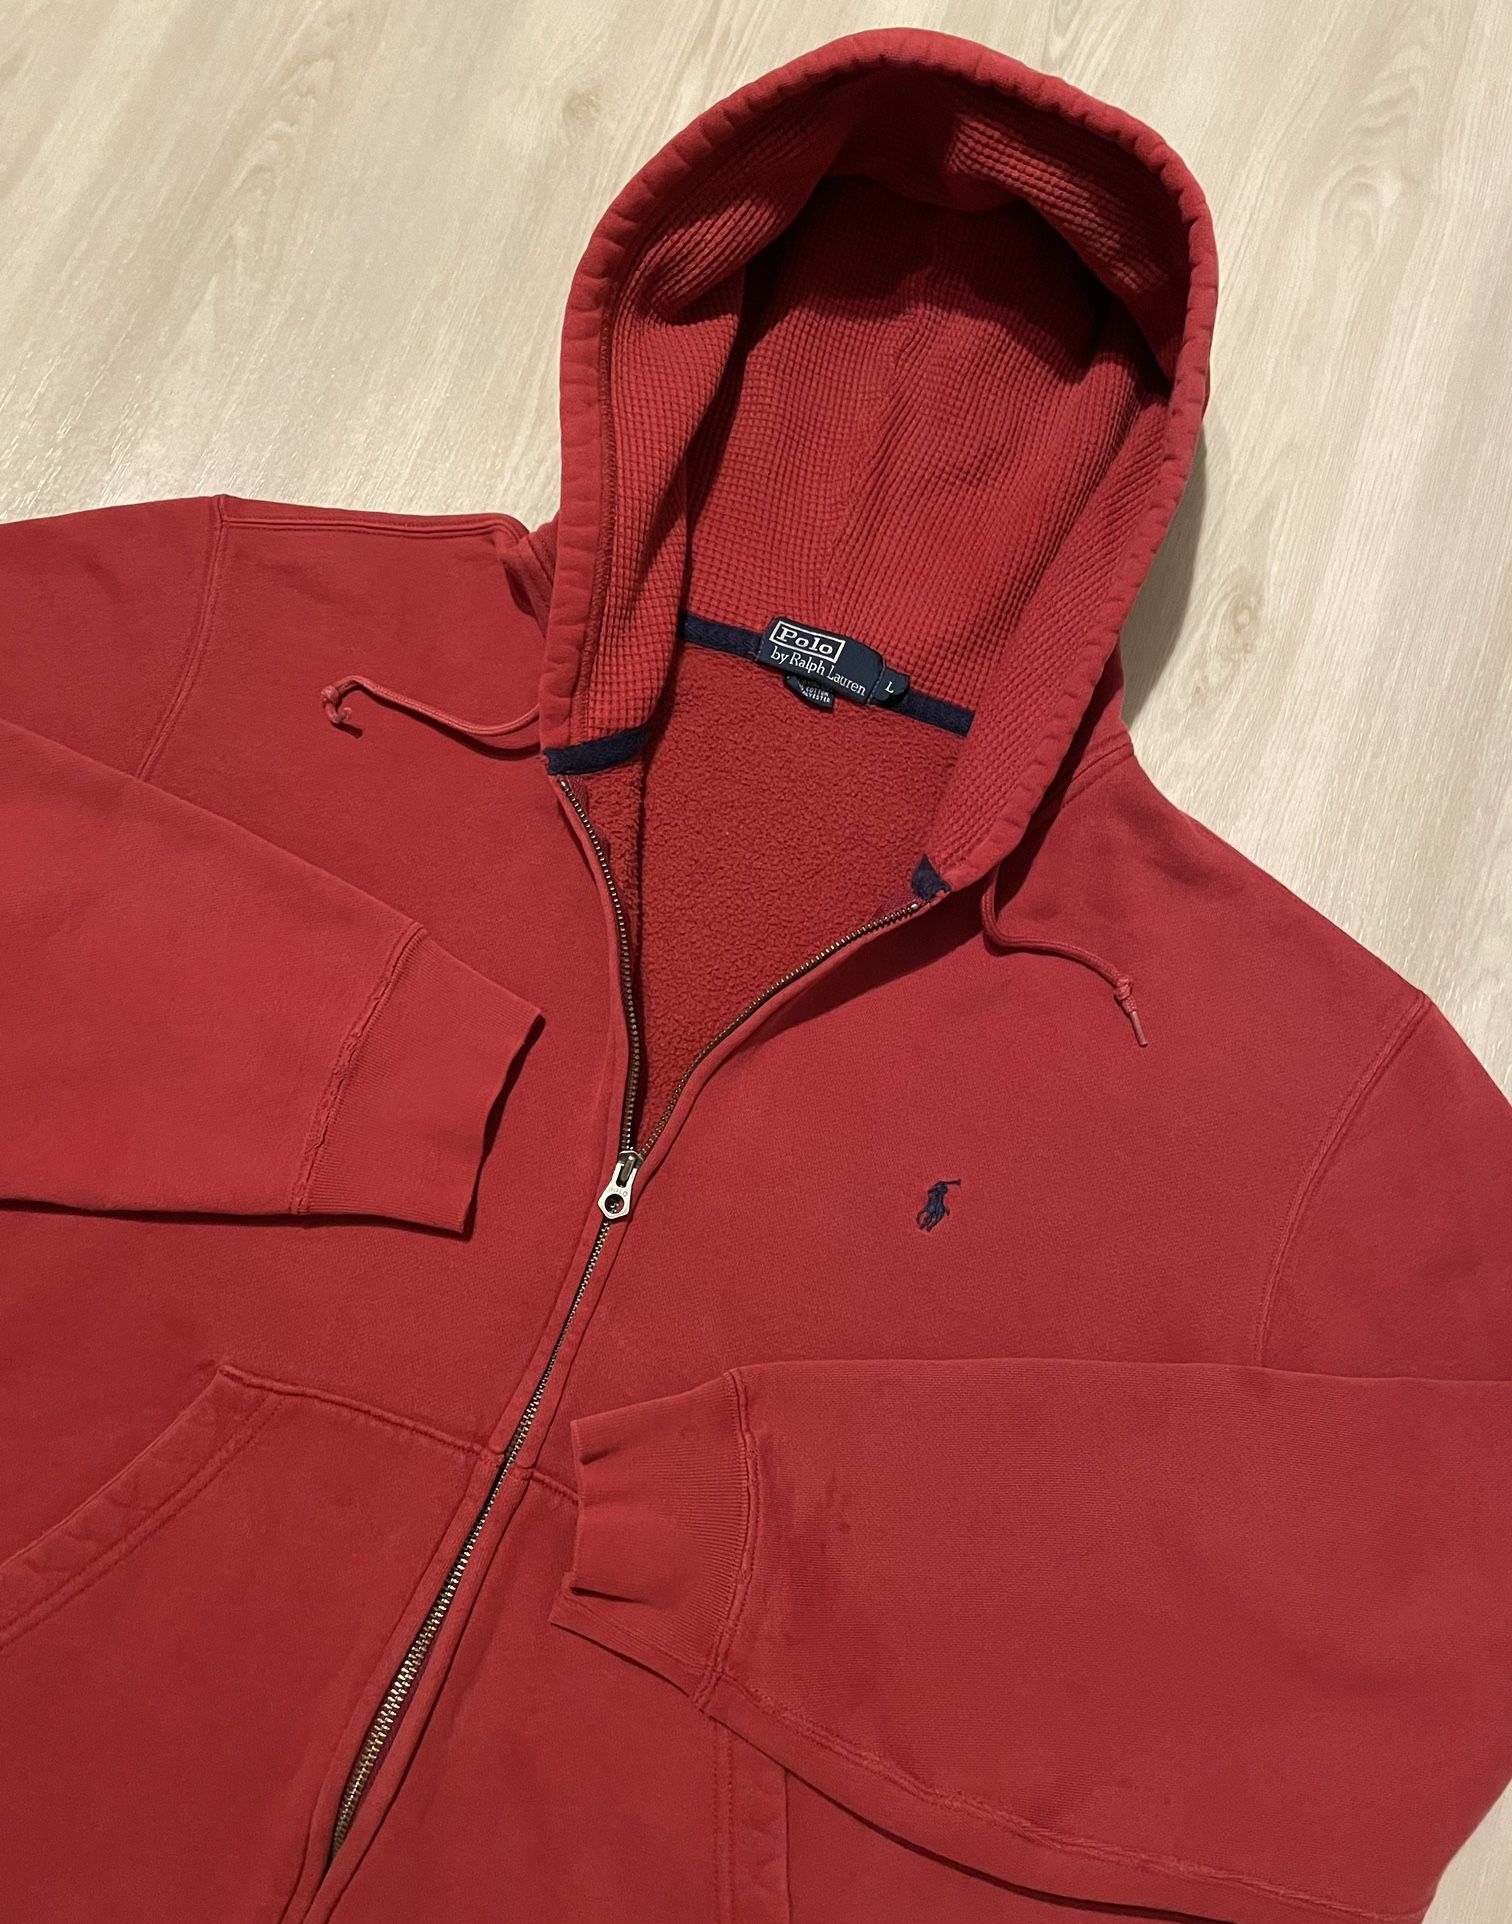 Vintage Polo Ralph Lauren Hoodie Mens Large for Sale in Spring, TX - OfferUp